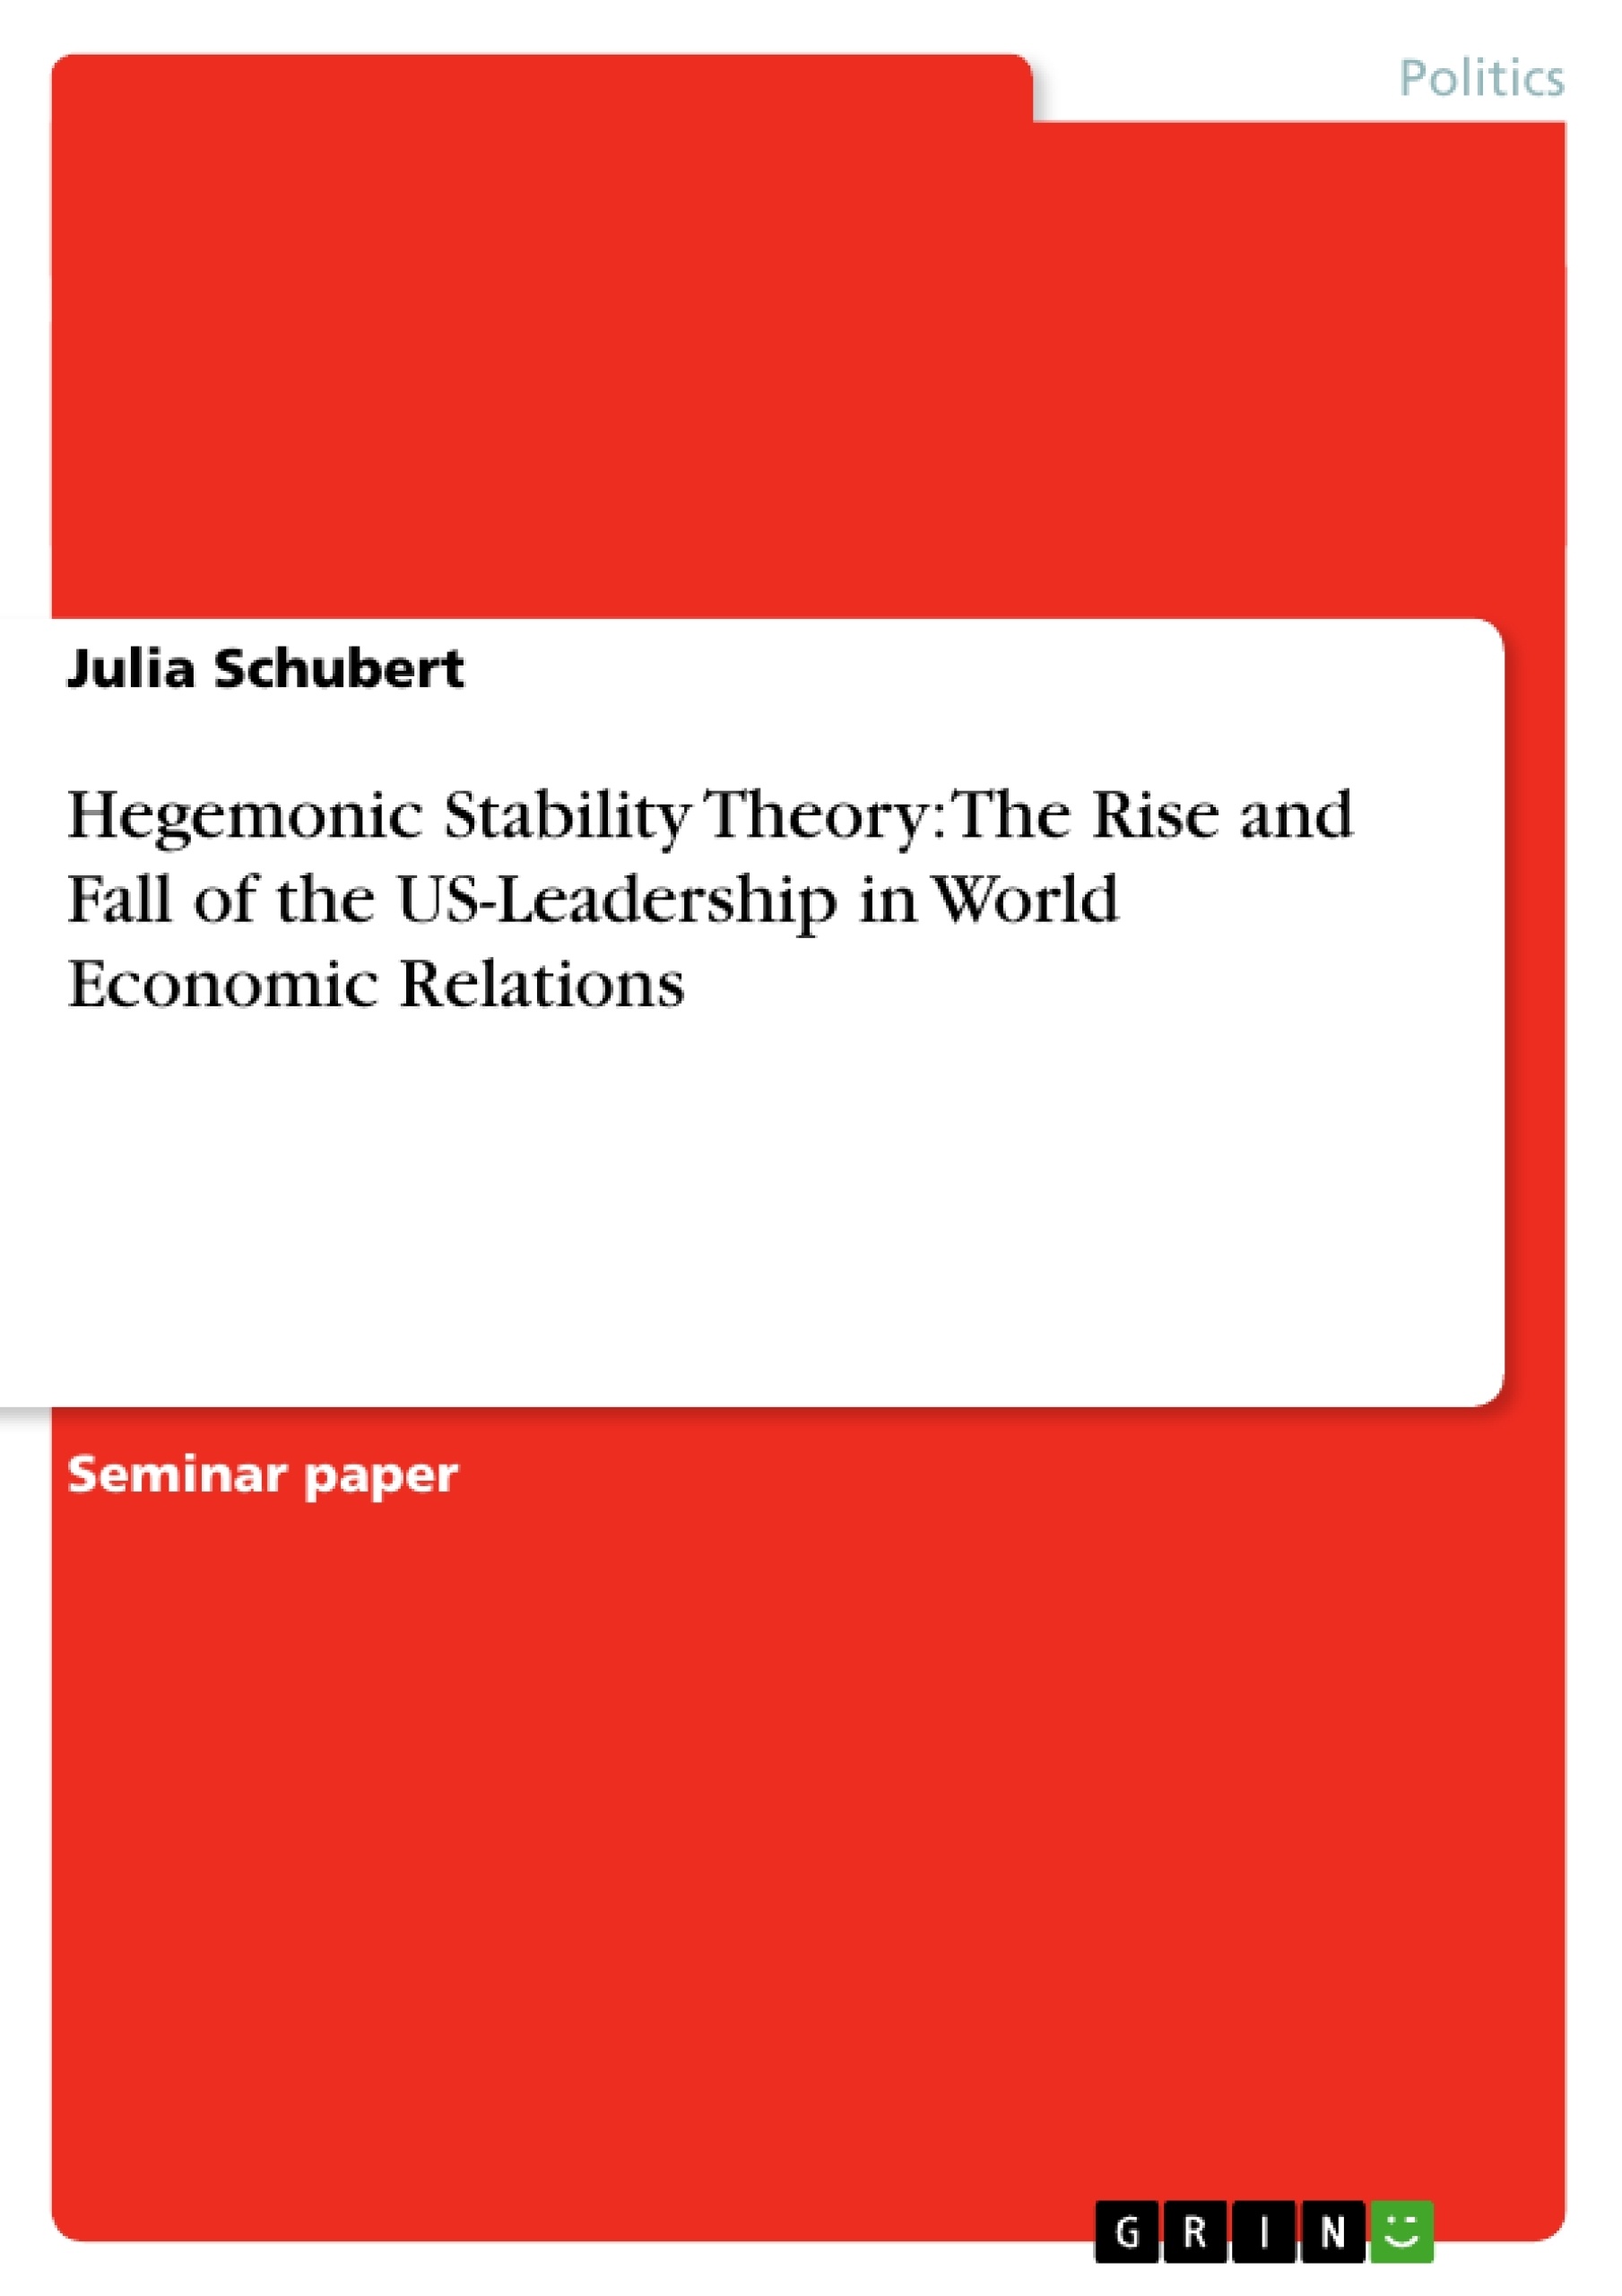 Title: Hegemonic Stability Theory: The Rise and Fall of the US-Leadership in World Economic Relations